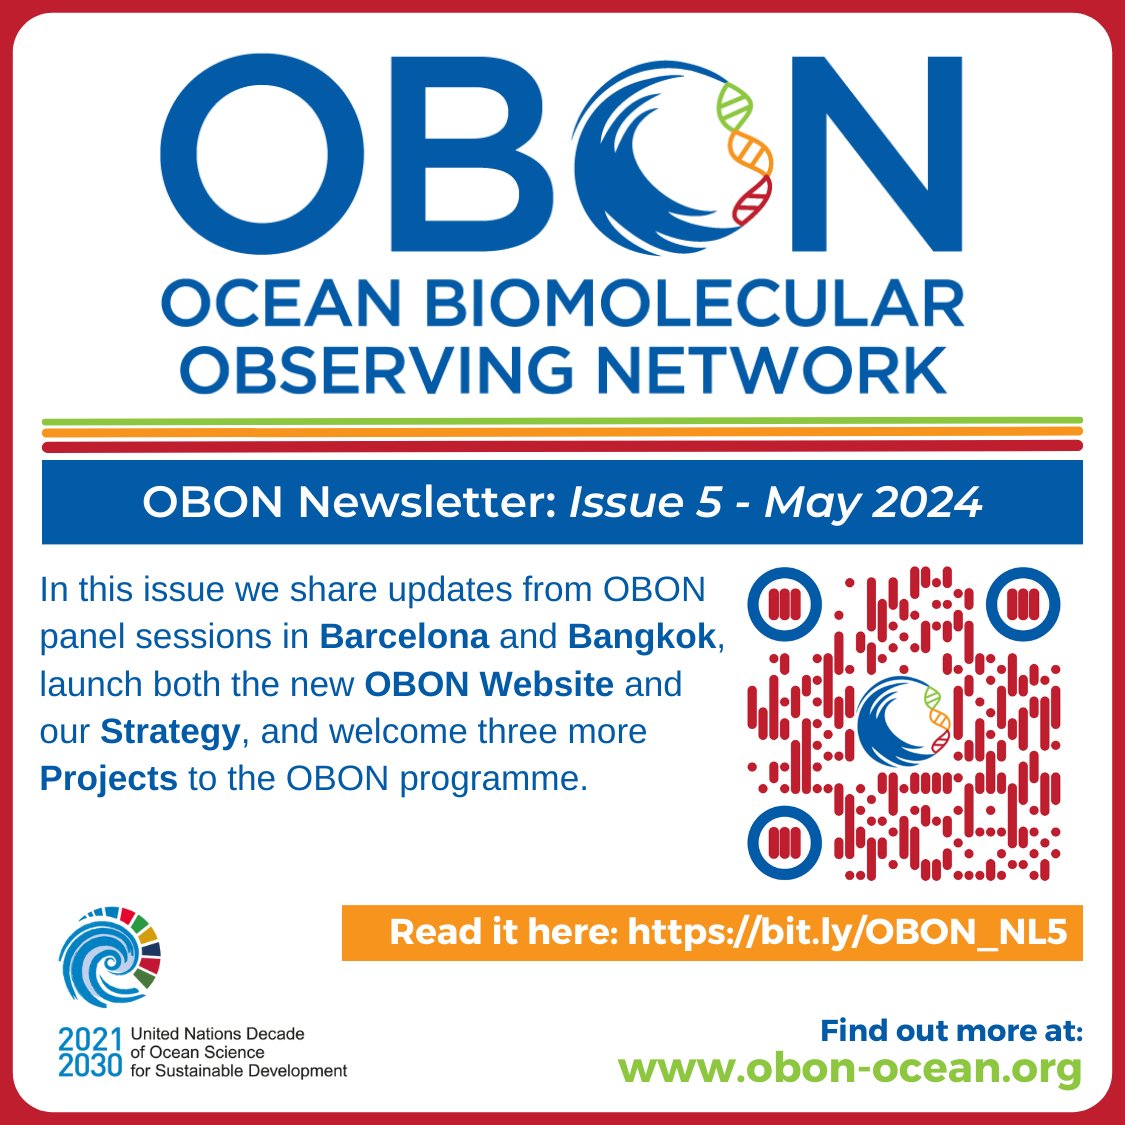 We've just released the latest updates from OBON, including our new Strategy publication, activities in Barcelona and Bangkok, new project intros, and the launch of our new website. Read our May Newsletter (Issue 5) here: bit.ly/OBON_NL5